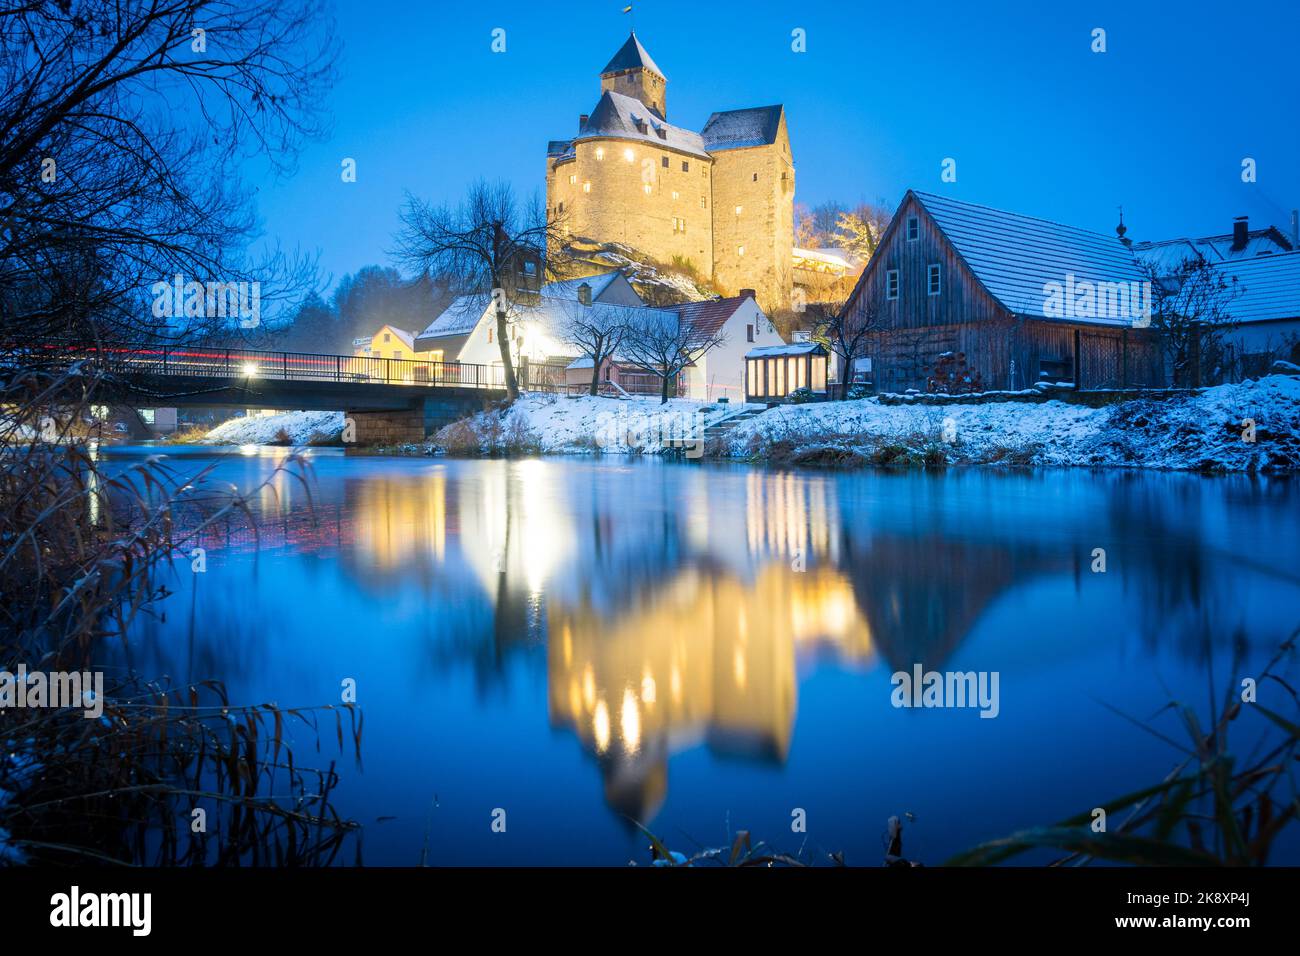 A scenic view of the Falkenberg castle on a cold night located in Sweden Stock Photo